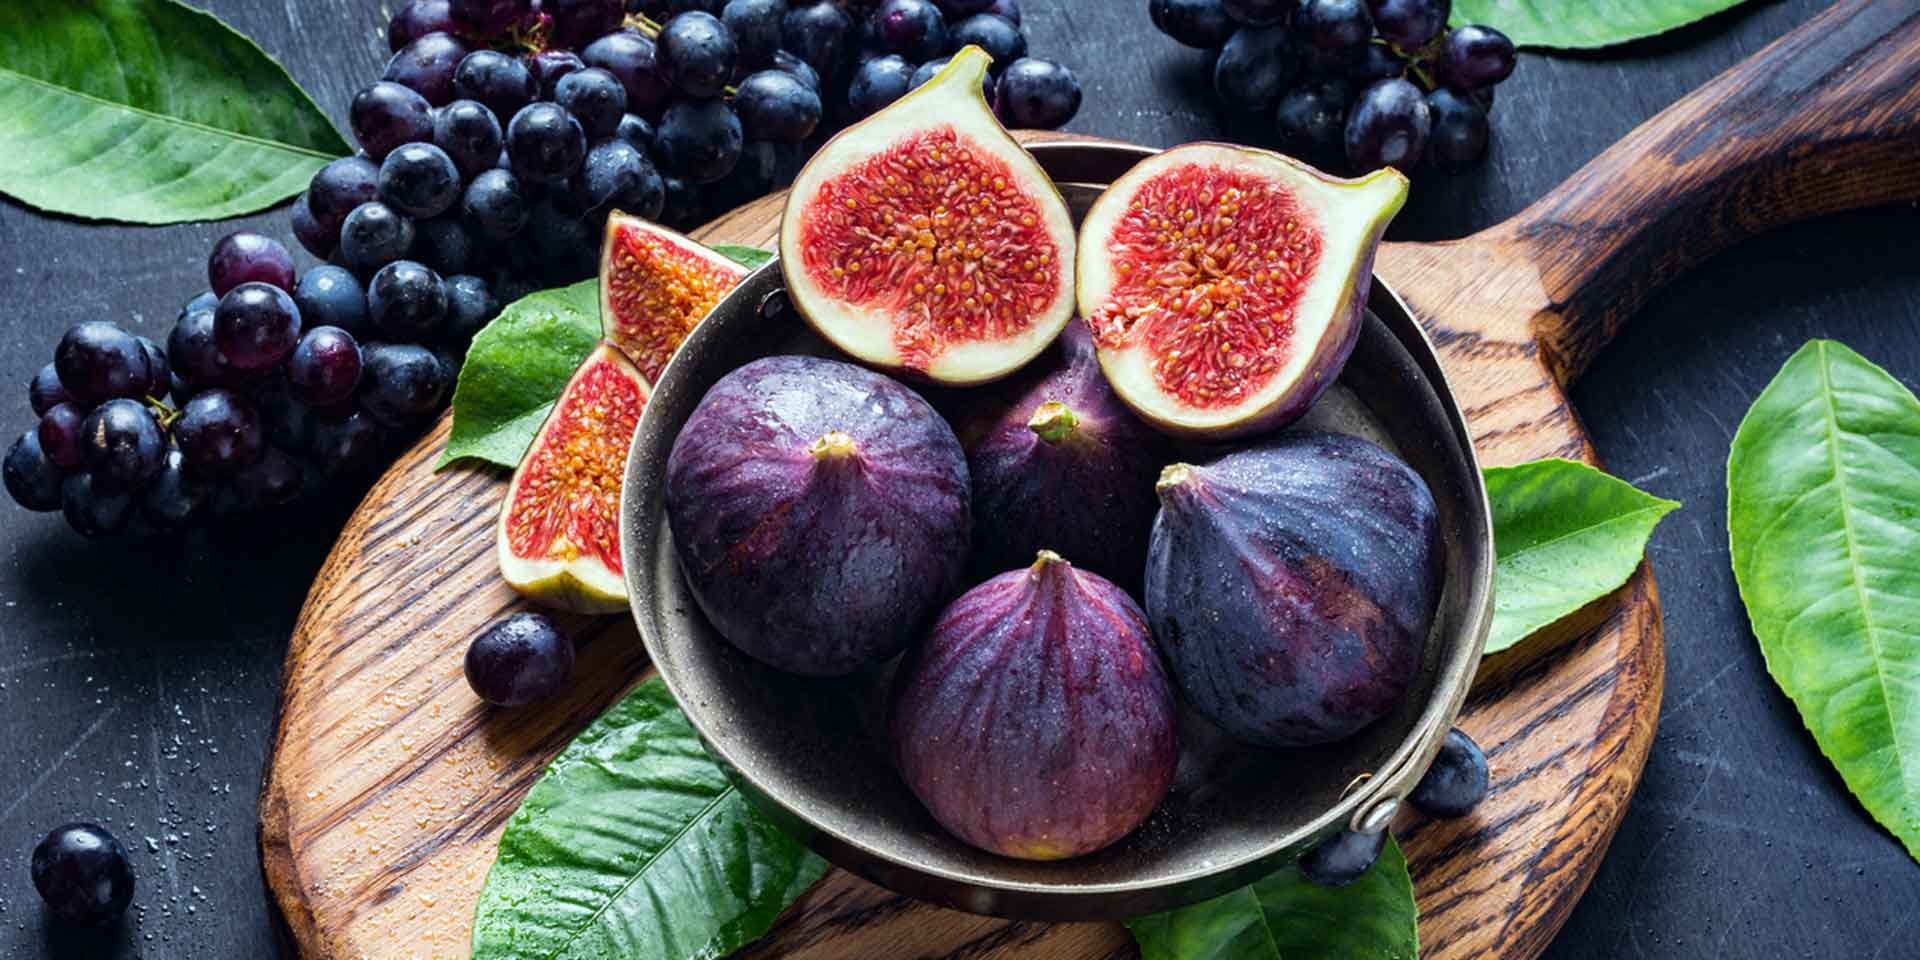 A bowl of figs surrounded by fig leaves on a wooden cutting board